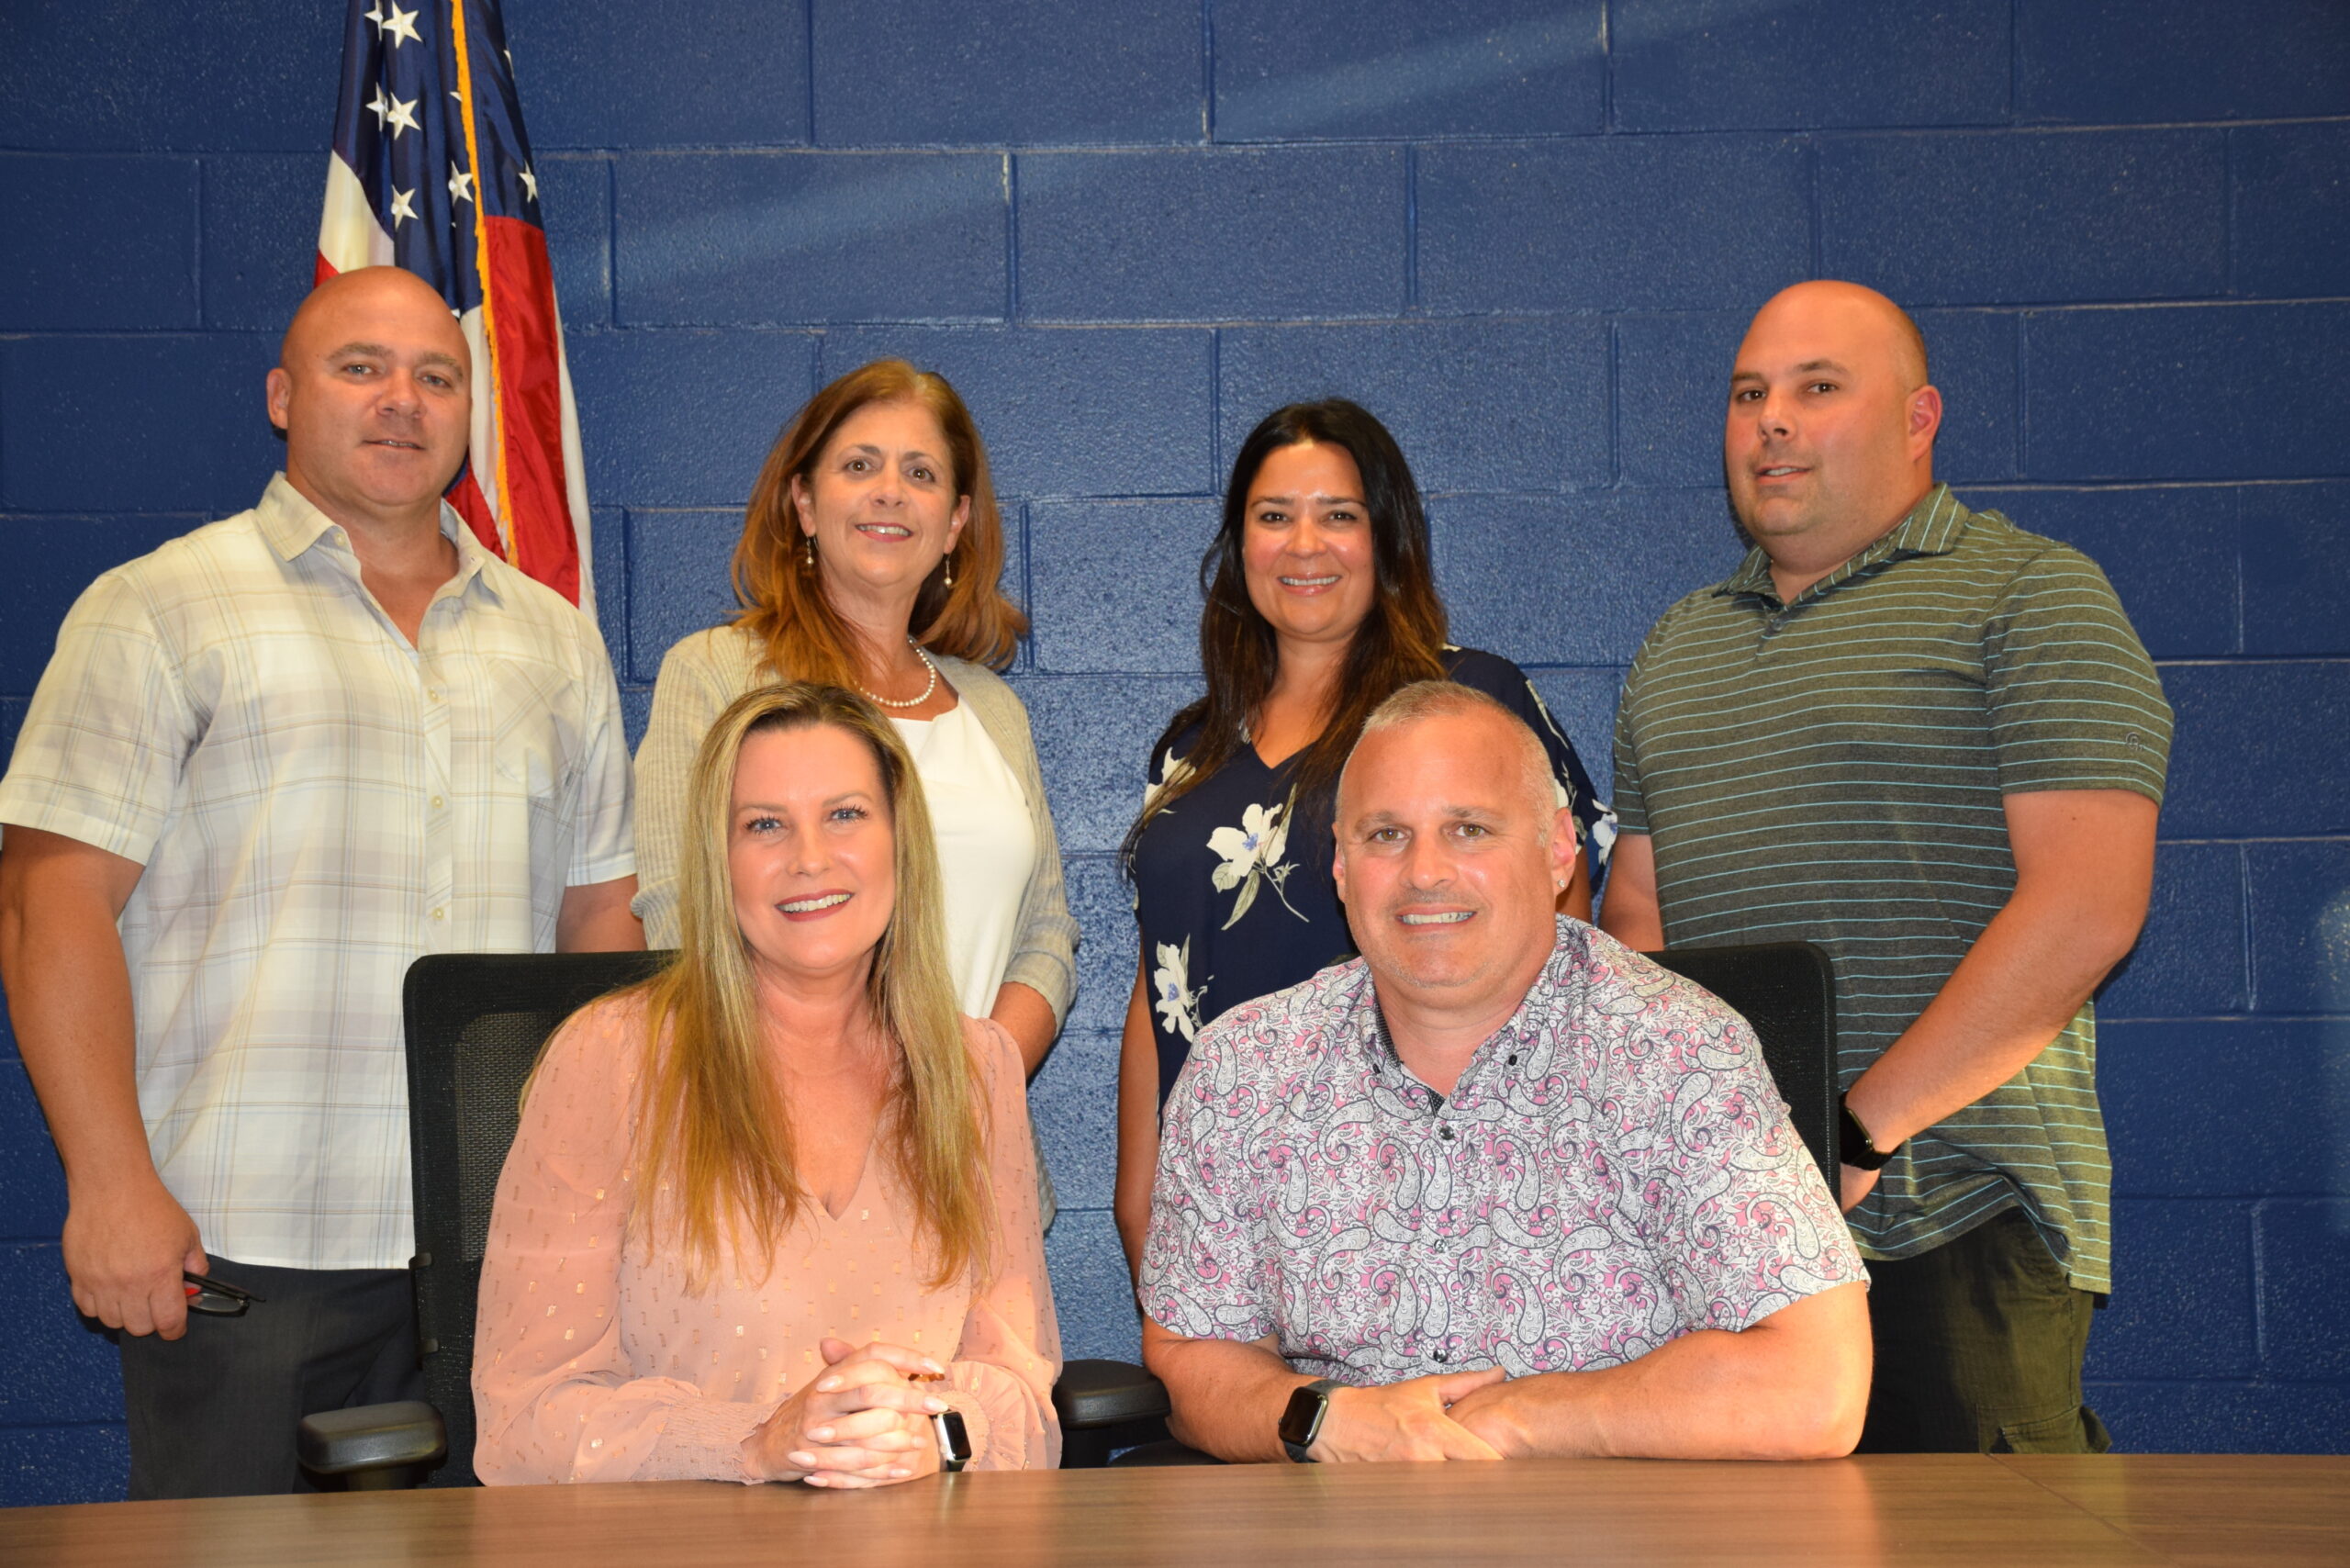 The Eastport-South Manor Board of Education held its annual reorganization meeting on July 6, swearing in newly elected members. The full board is, from left front, Vice President
Christine Racca, President James Governali; and back, trustees David Samartino, Cristina
(Tina) Costanza, Renee Pastor and Jeffrey Goldhammer. COURTESY EASTPORT-SOUTH MANOR SCHOOL DISTRICT